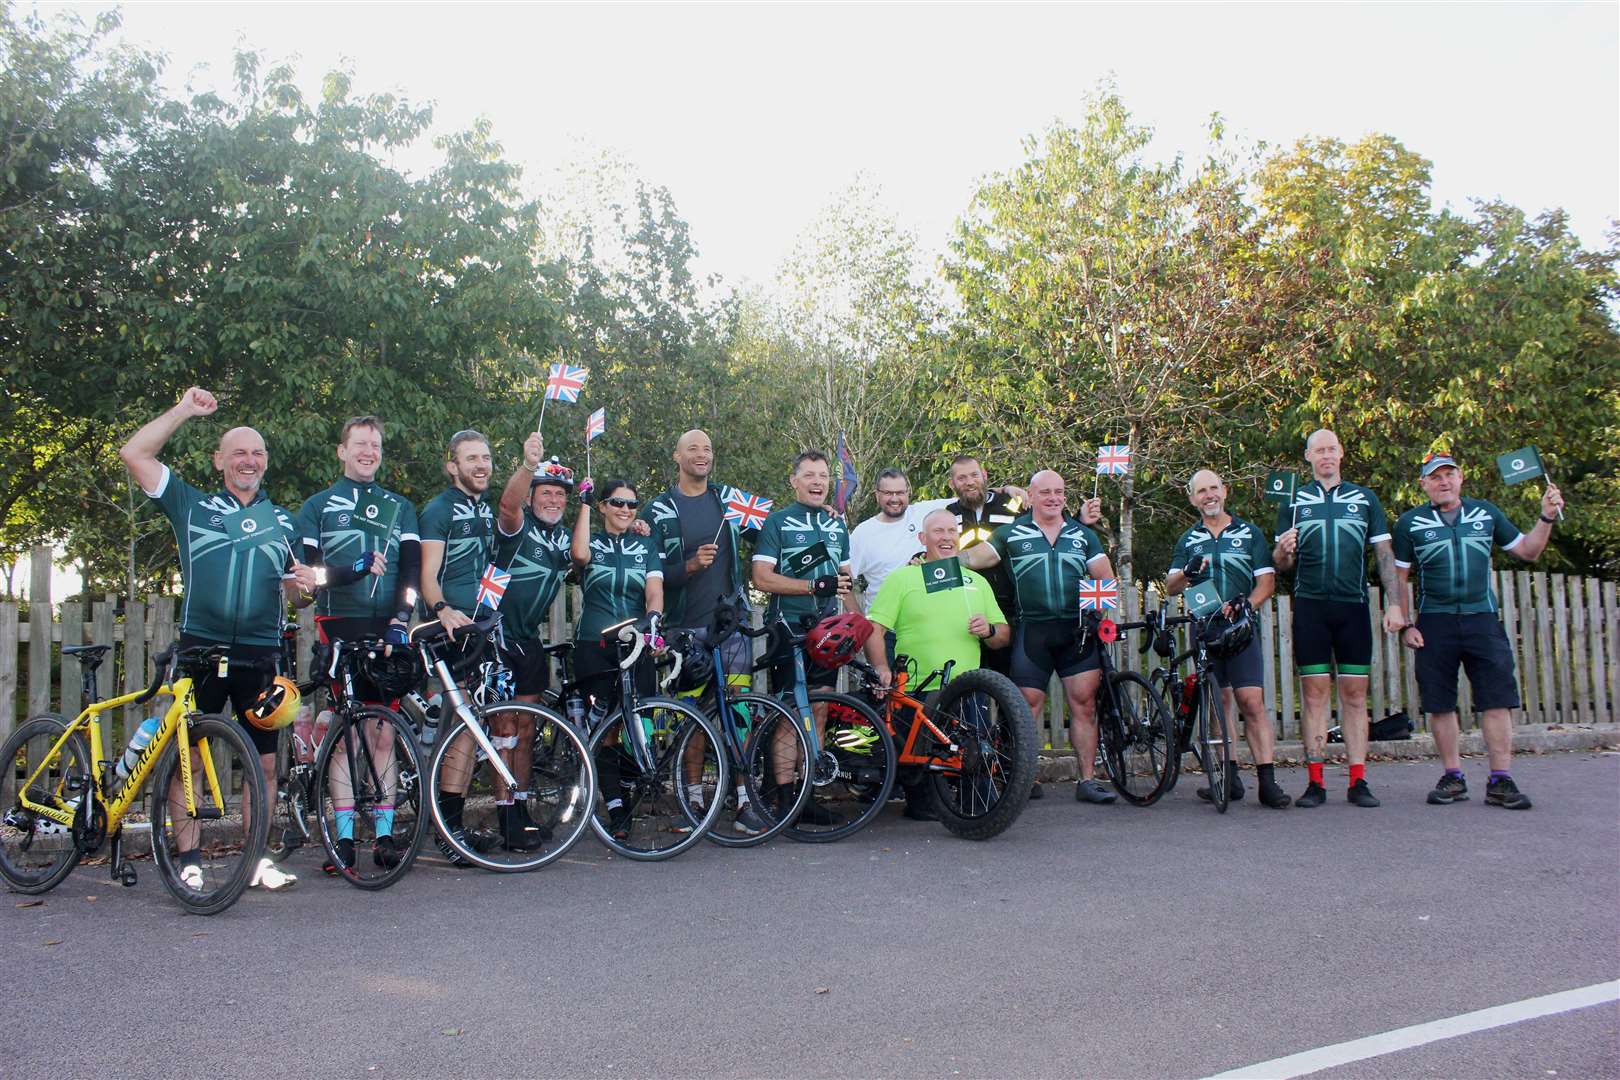 The team of cyclists who raised more than £10,000 for The Not Forgotten, with Kev Stewart fourth from the right. Picture: Louise Coopman